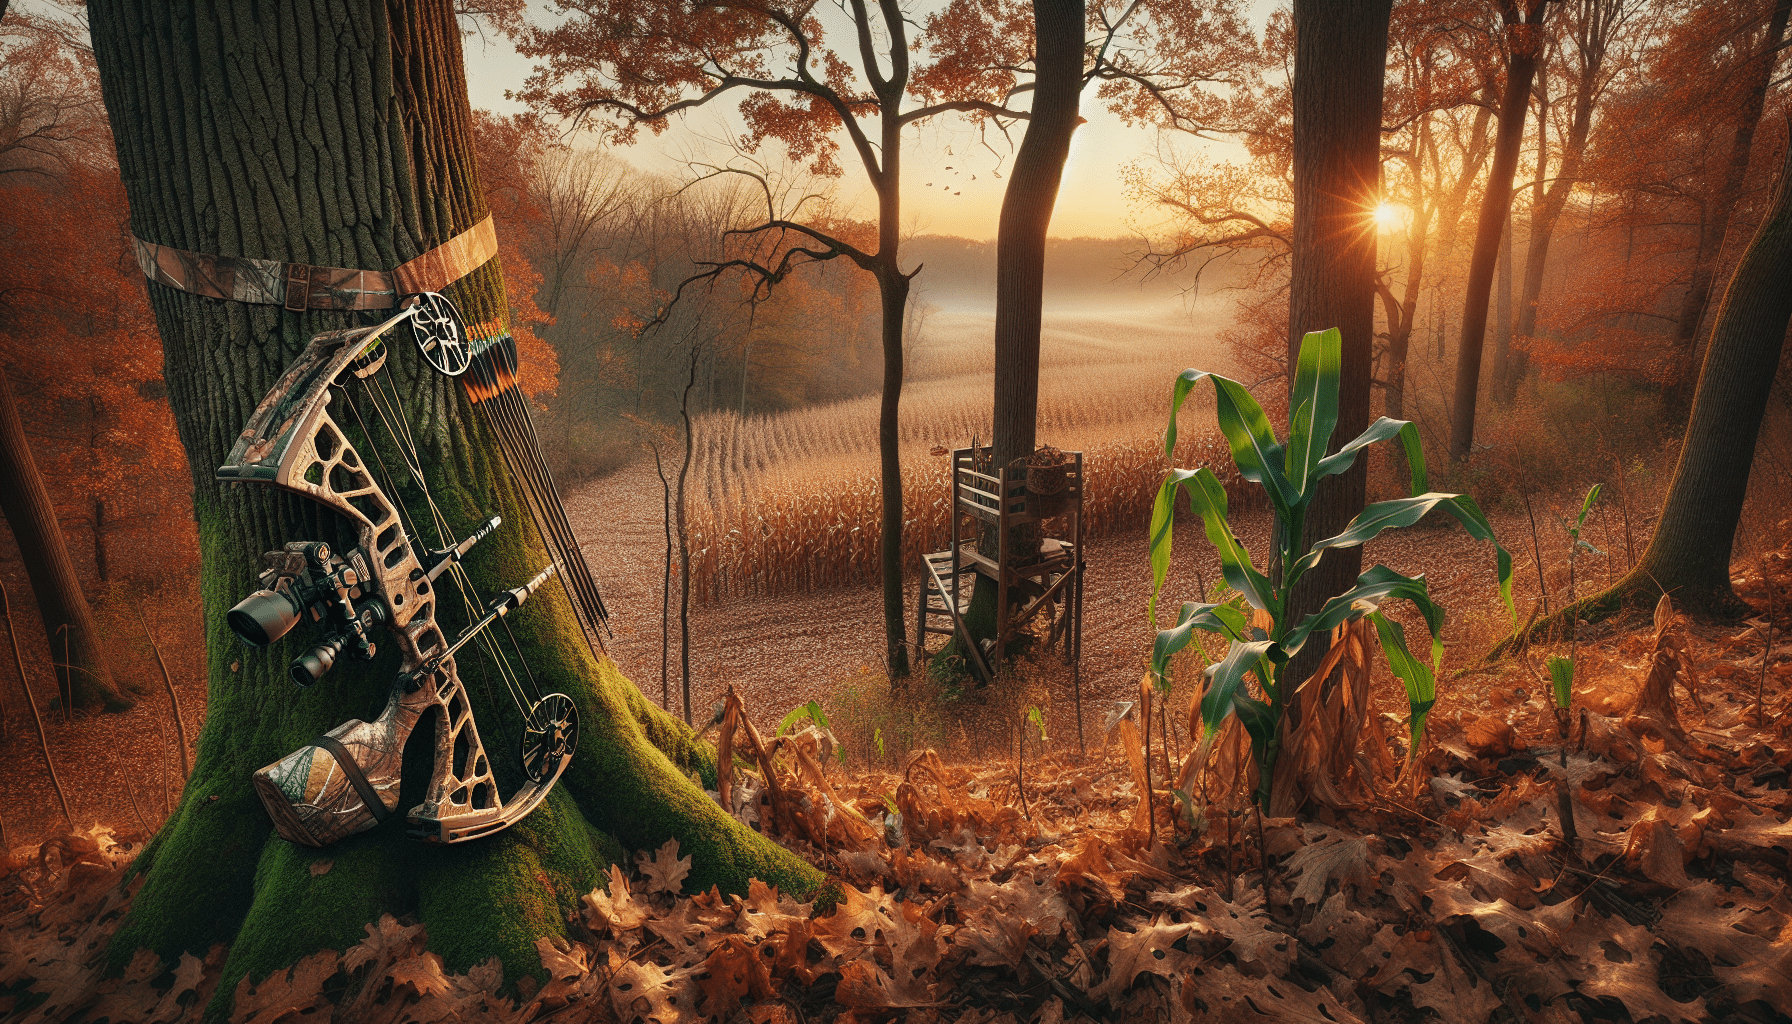 An autumn terrain with deciduous trees shedding leaves, and a network of deer tracks scattered across the ground. Nearby, there's a deer stand built with hidden camouflage amidst the trees. A compound bow along with a quiver filled with arrows rests against the bark of a tree, signifying a hunting strategy without revealing any human presence. Last rays of the setting sun filters through the branches, indicating the 'late-season' time frame. The surrounding vegetation includes corn stalks, symbolizing food plots commonly used for attracting deer. No text, logos, or brand names can be seen.